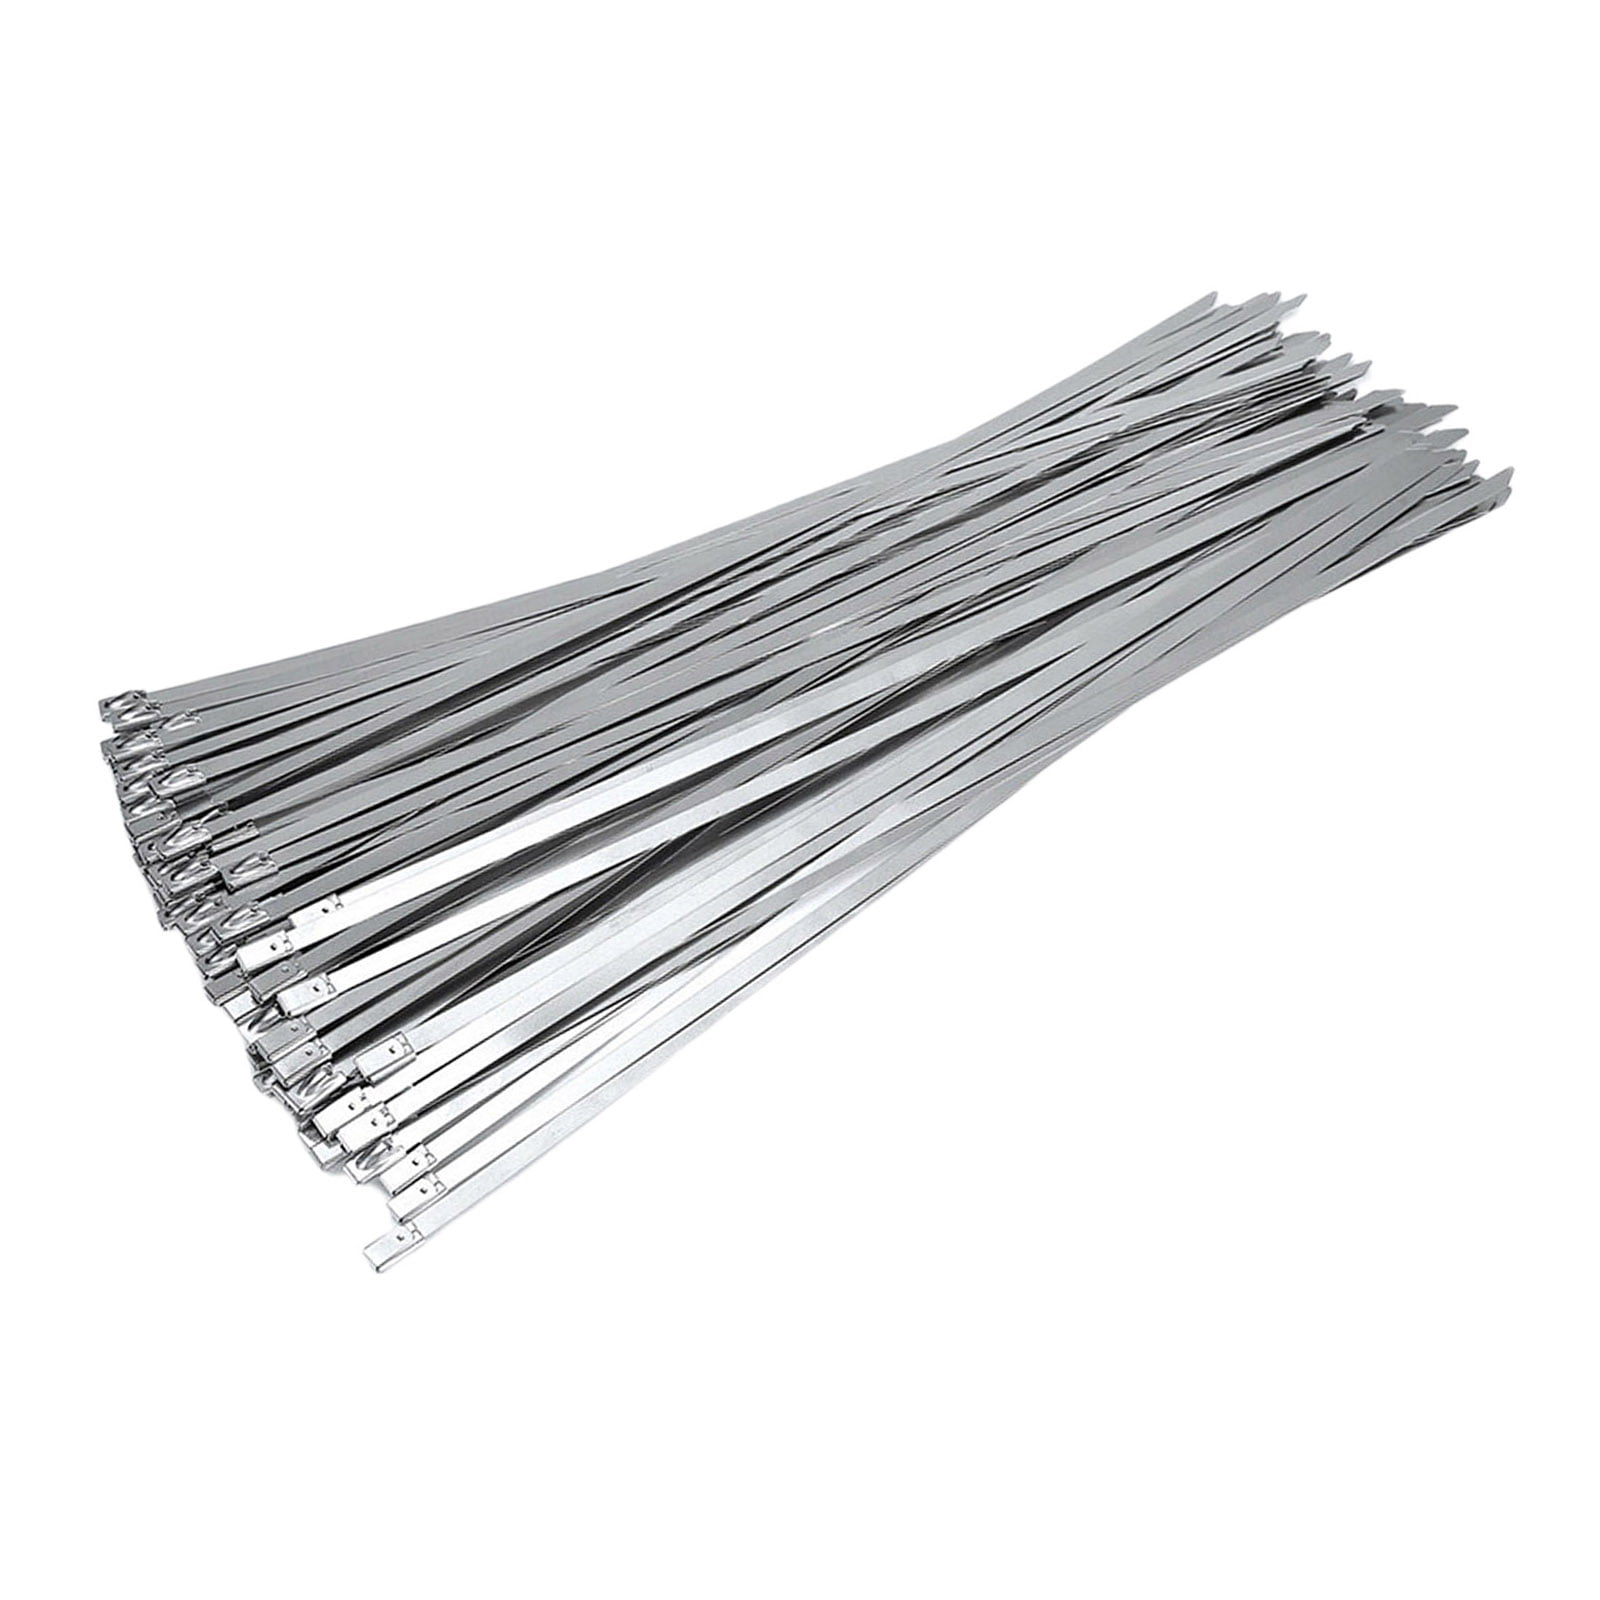 10x 6 in Stainless Steel Zip Ties Exhaust Wrap Coated Locking Cable Straps 